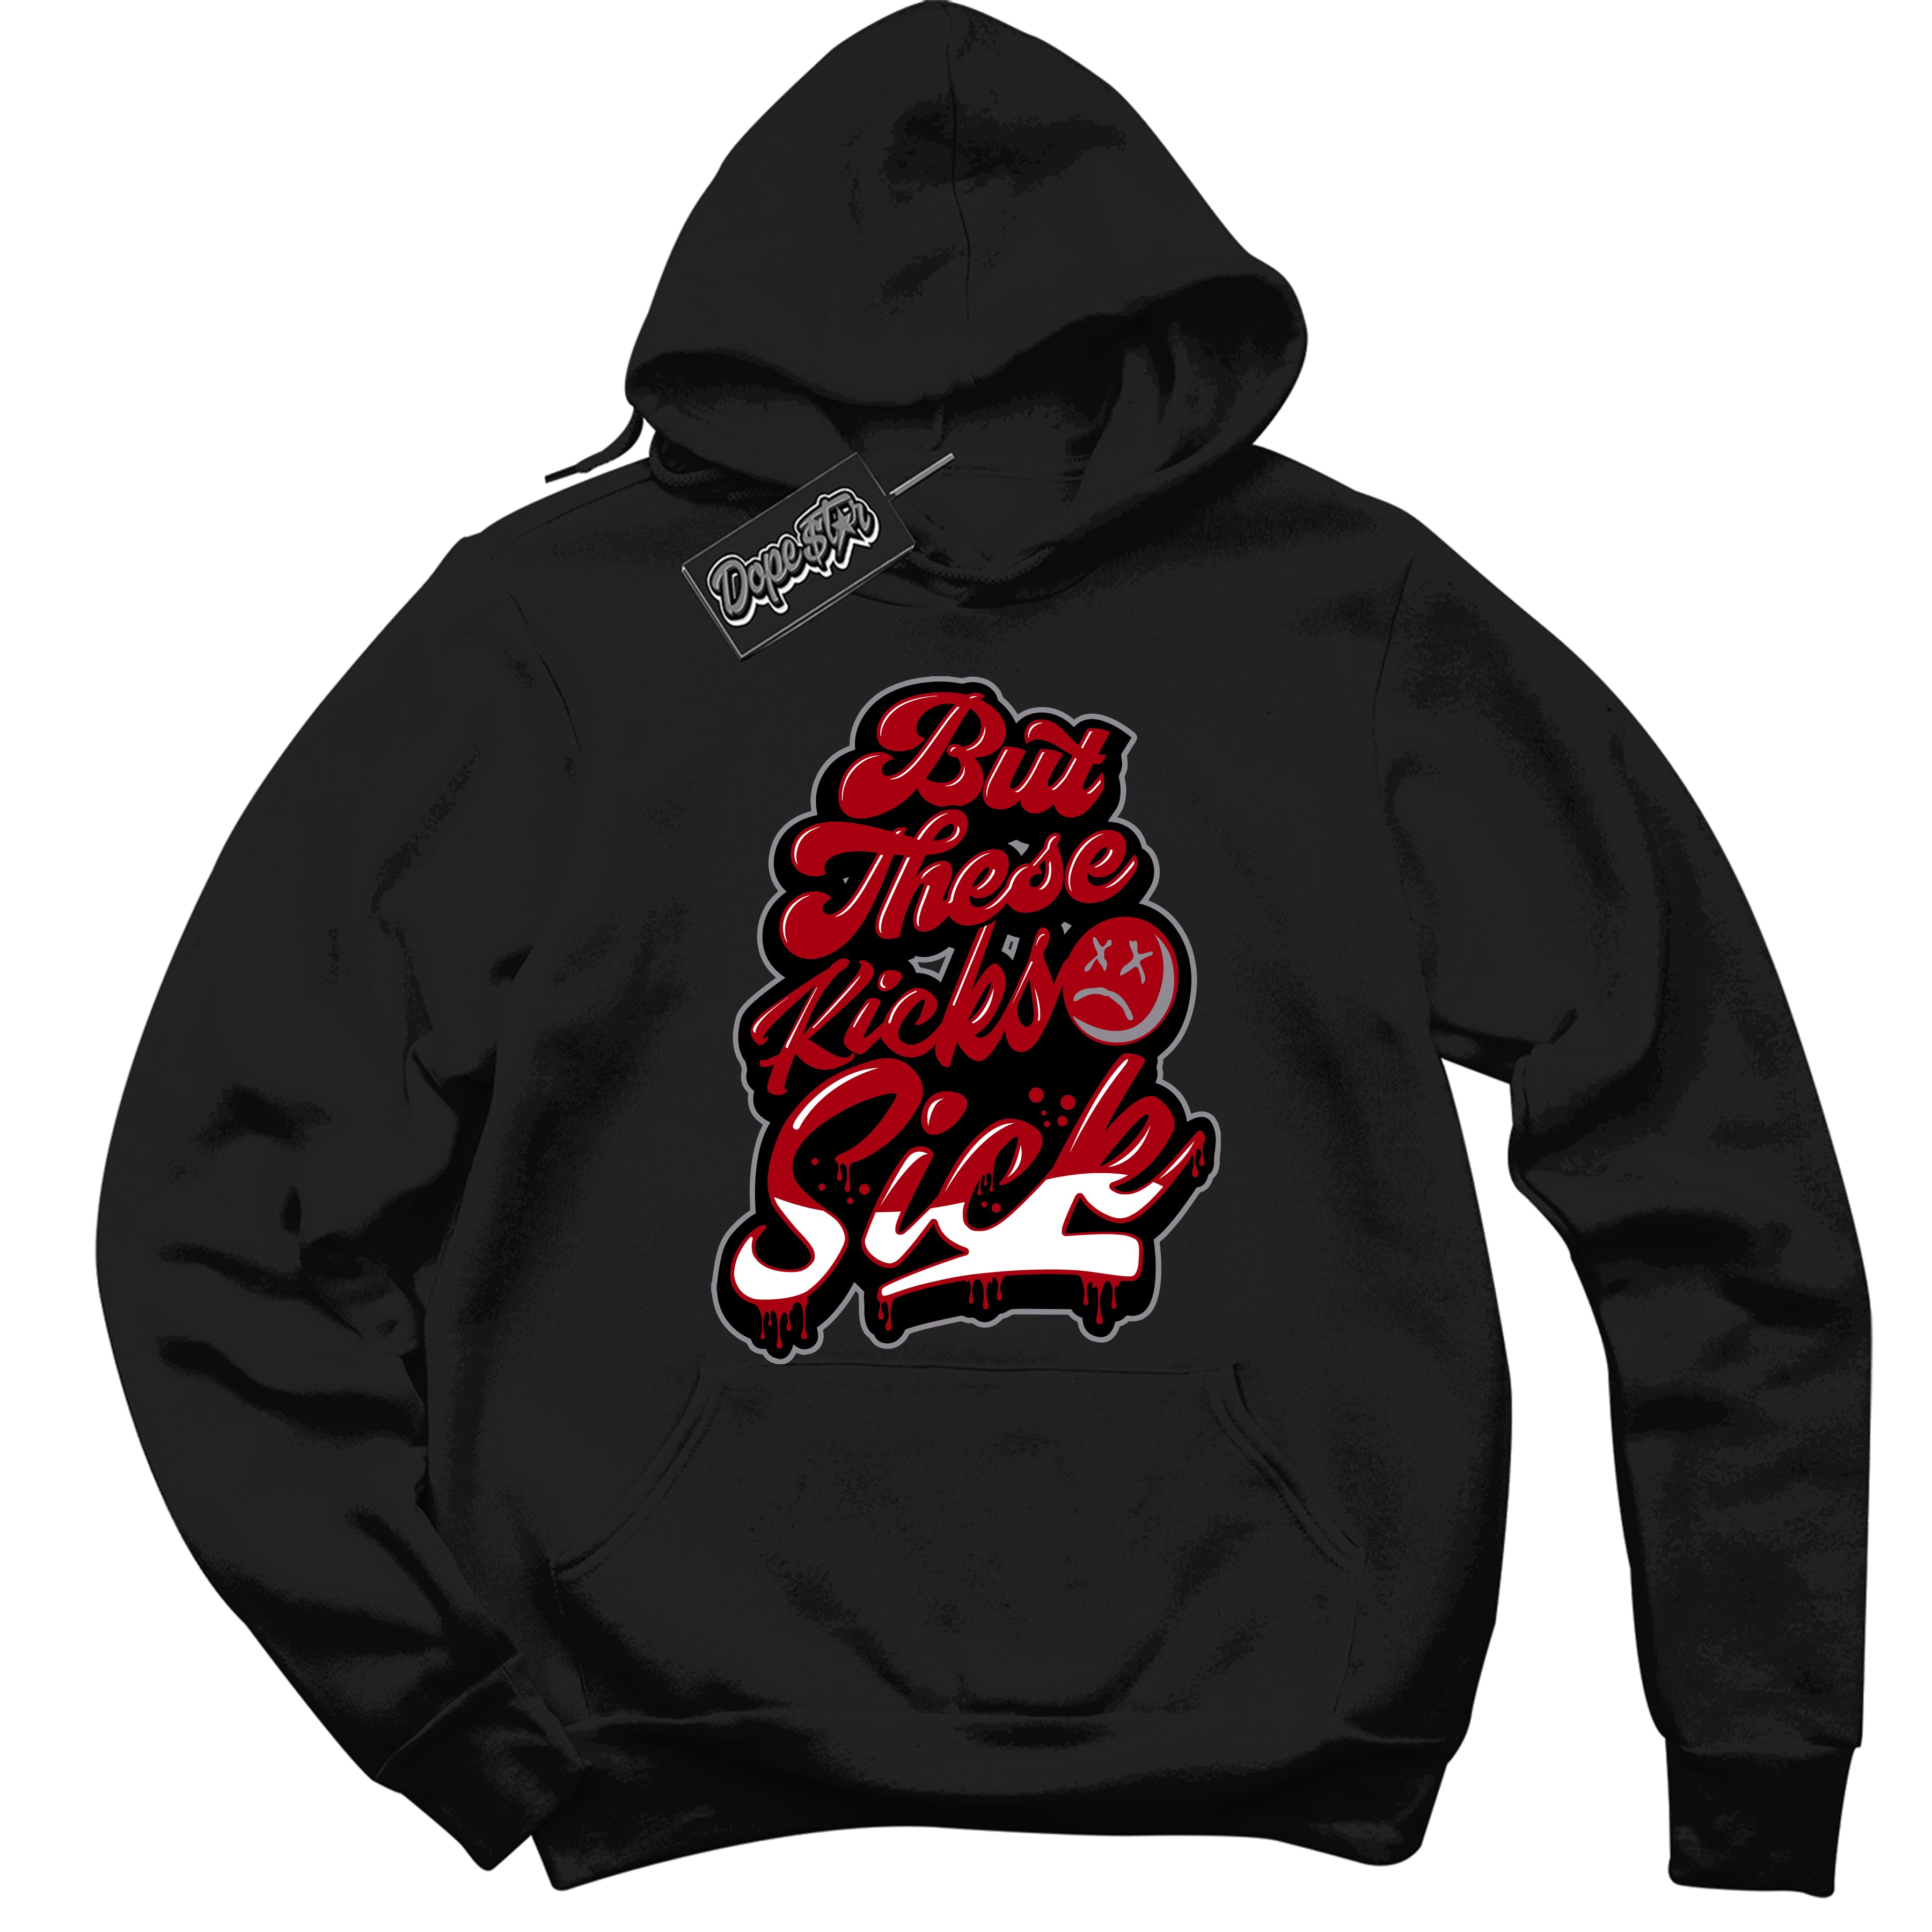 Cool Black Hoodie with “ Kick Sick ”  design that Perfectly Matches  Bred Reimagined 4s Jordans.